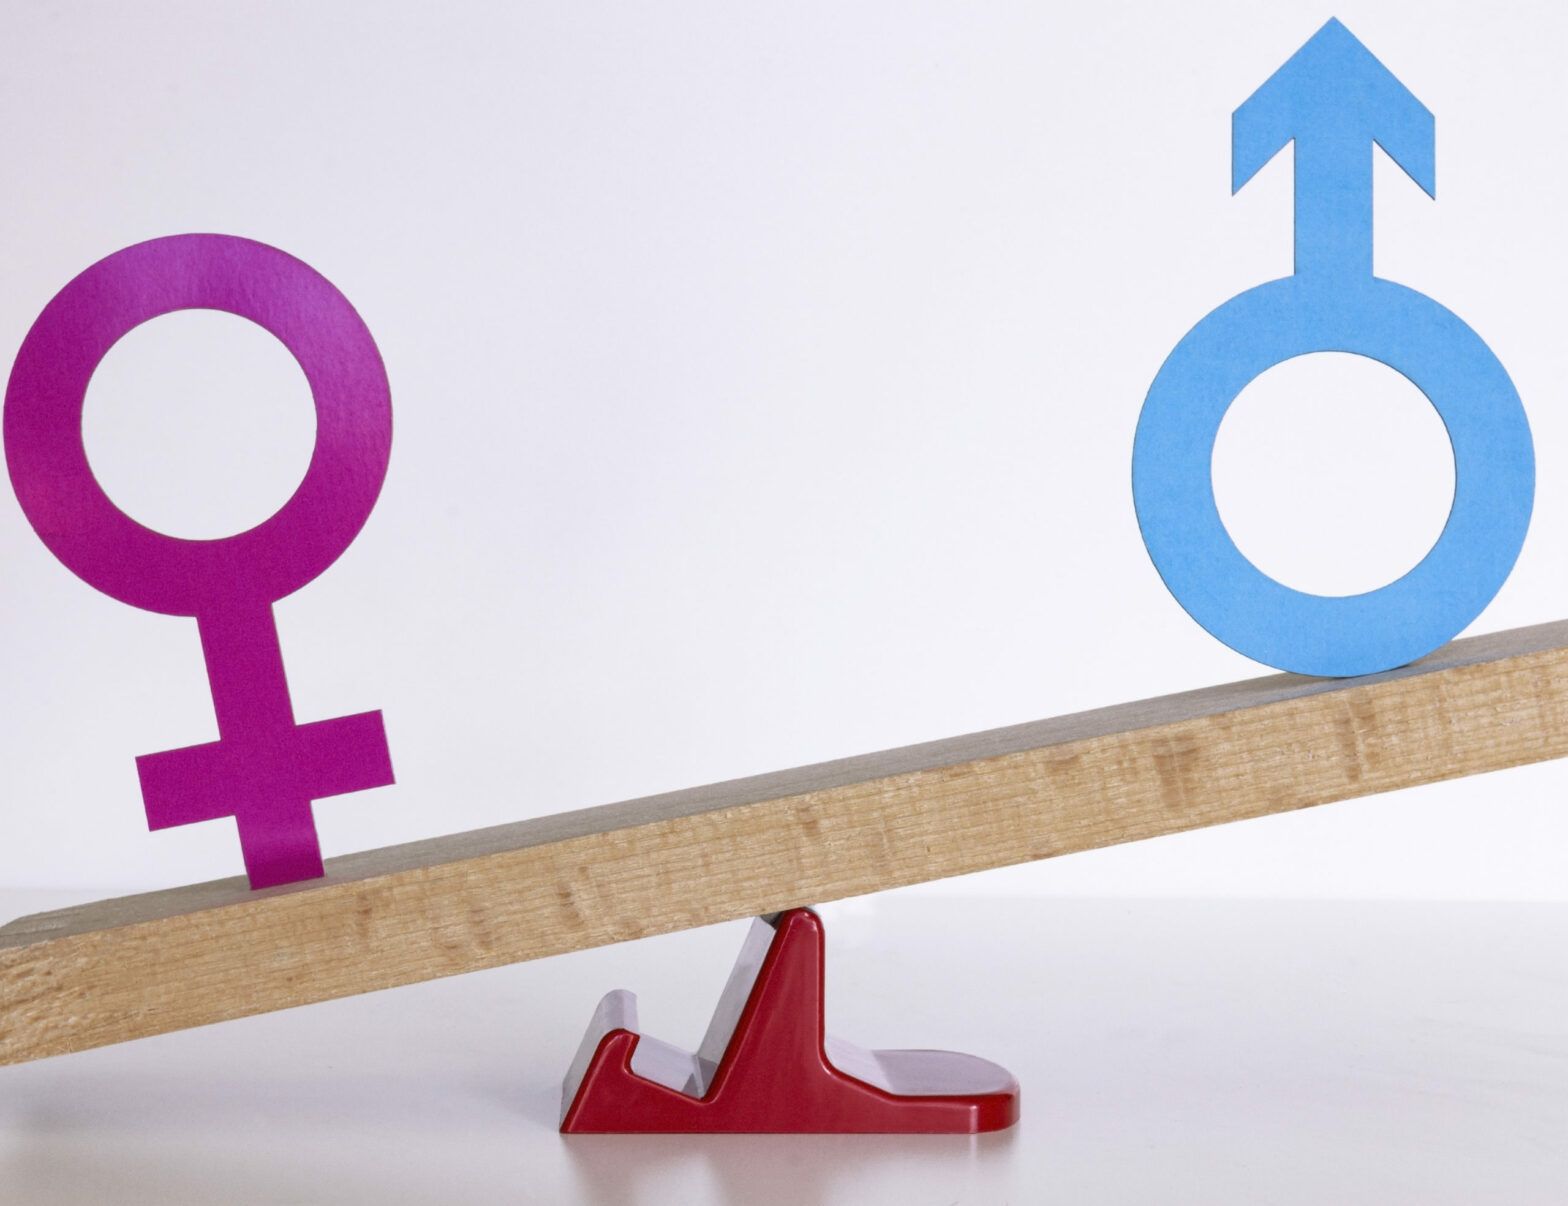 Campaign urges firms to report gender pay gaps sooner and better